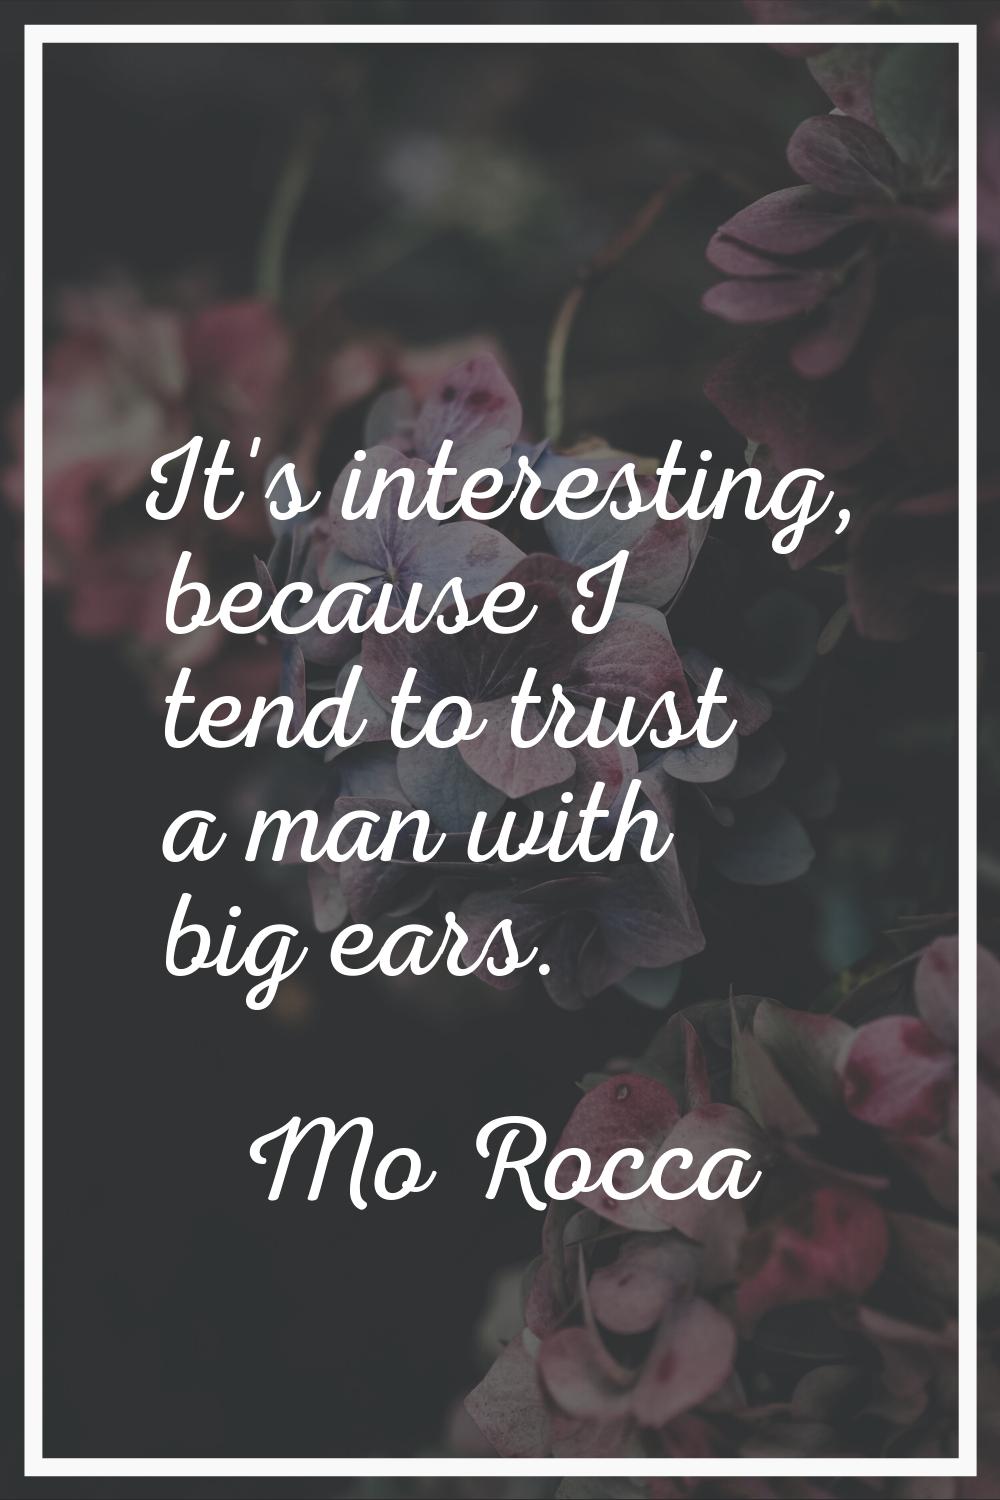 It's interesting, because I tend to trust a man with big ears.